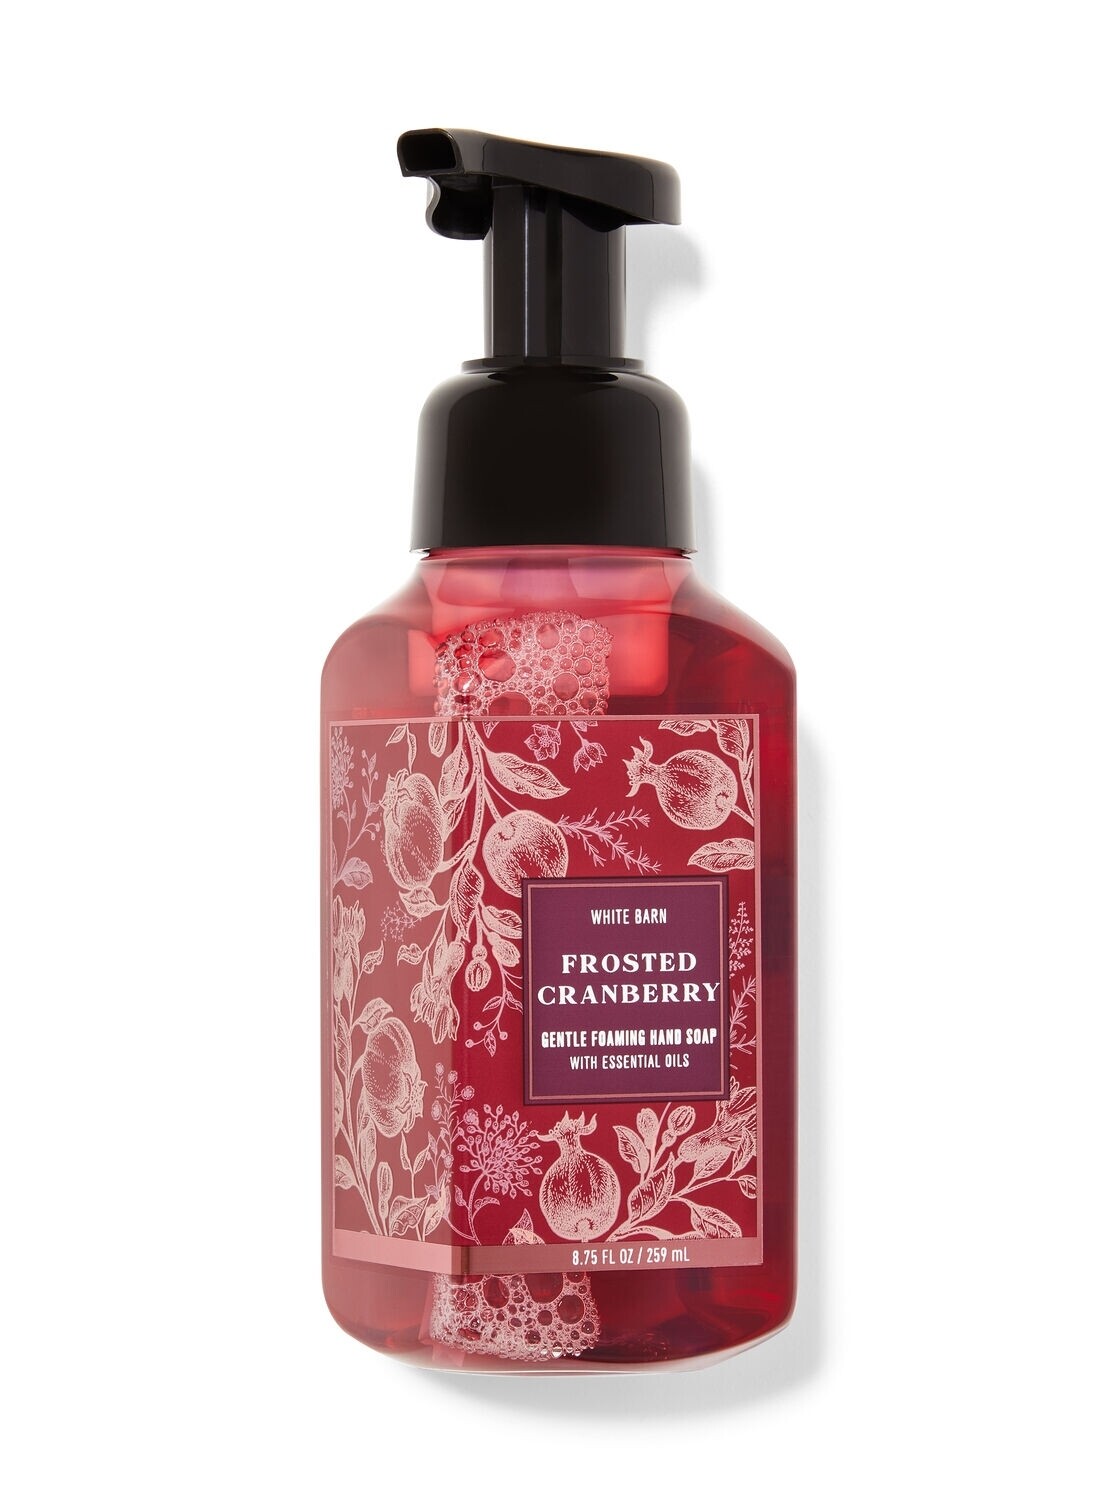 FROSTED CRANBERRY -Gentle Foaming Hand Soap